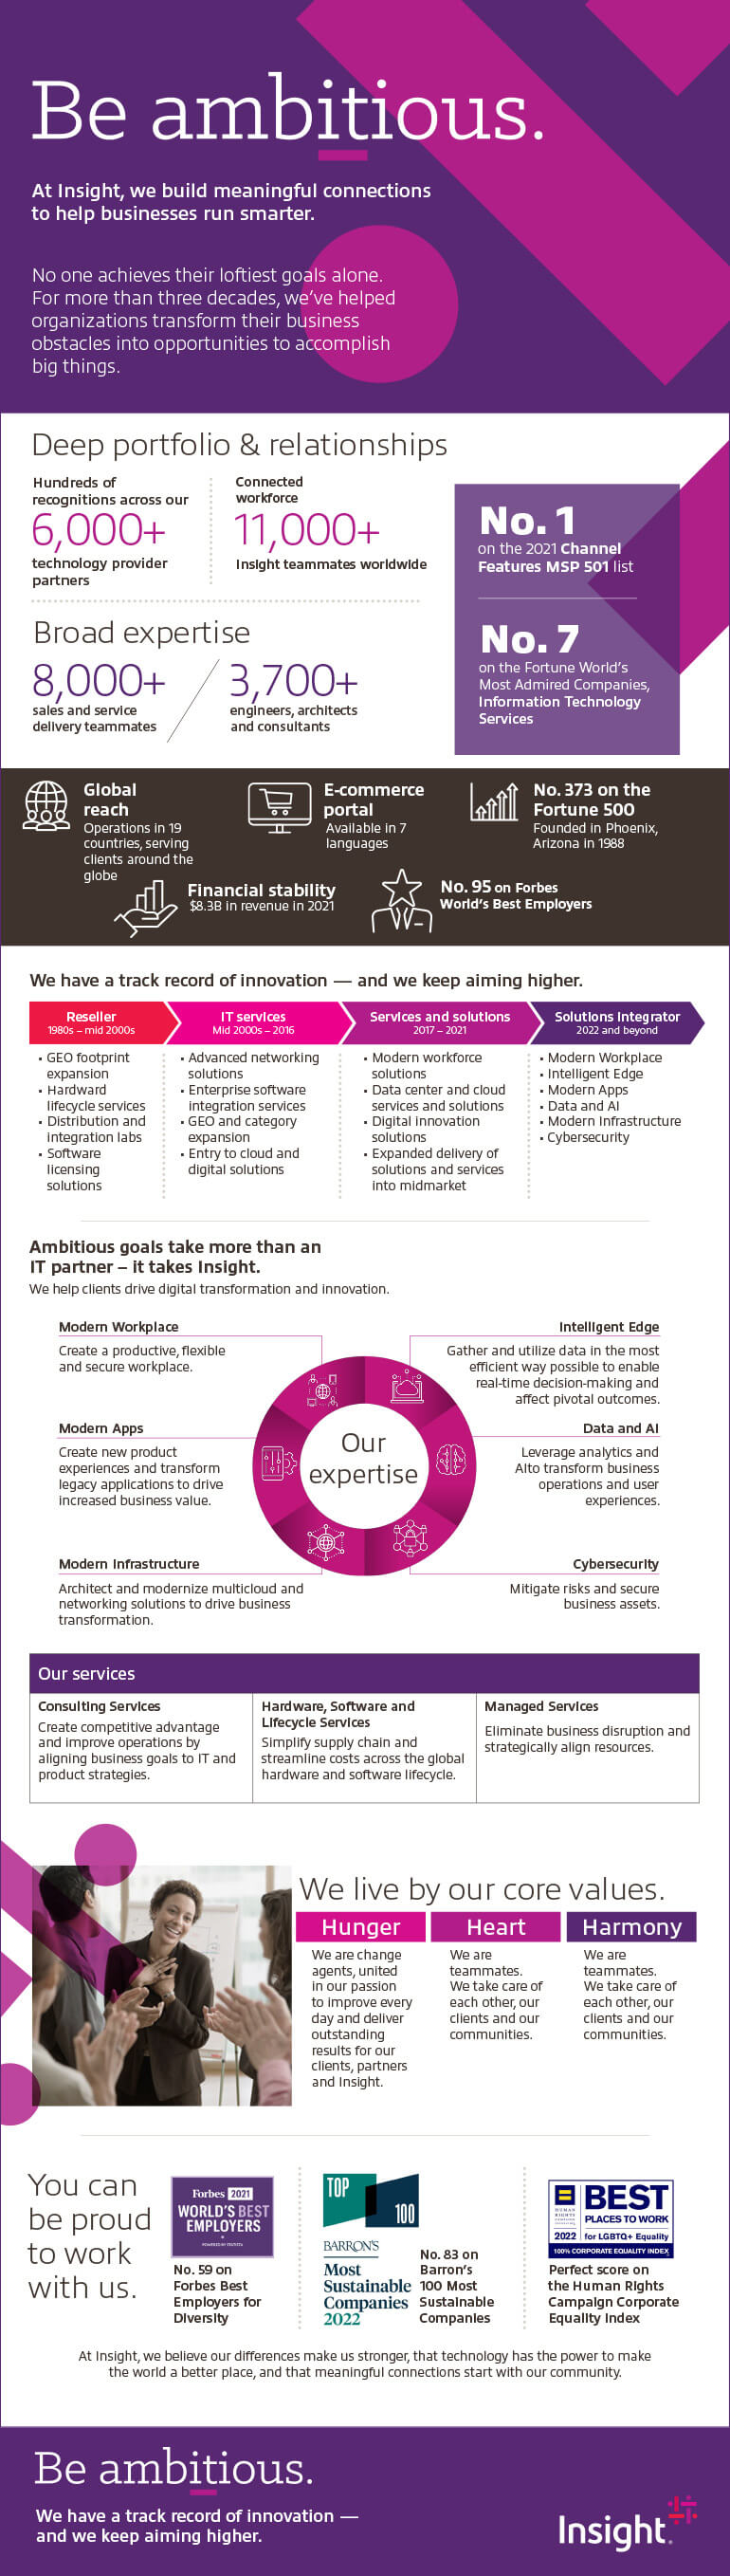 Insight Company Overview Infographic